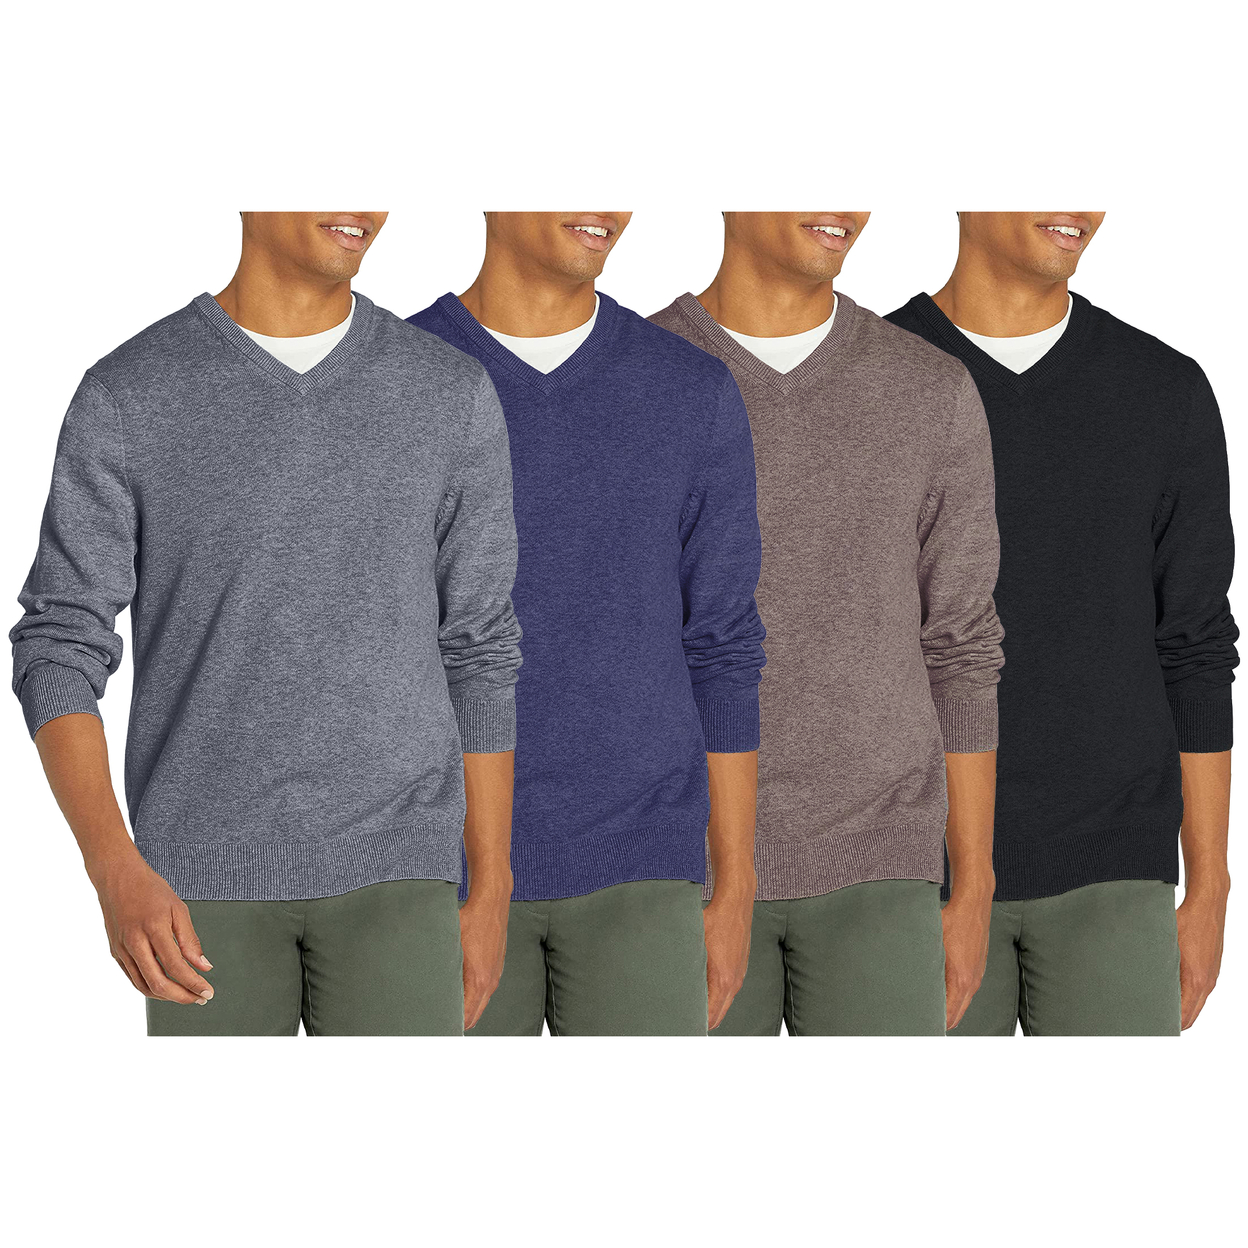 3-Pack: Men's Casual Ultra Soft Slim Fit Warm Knit V-Neck Sweater - X-large